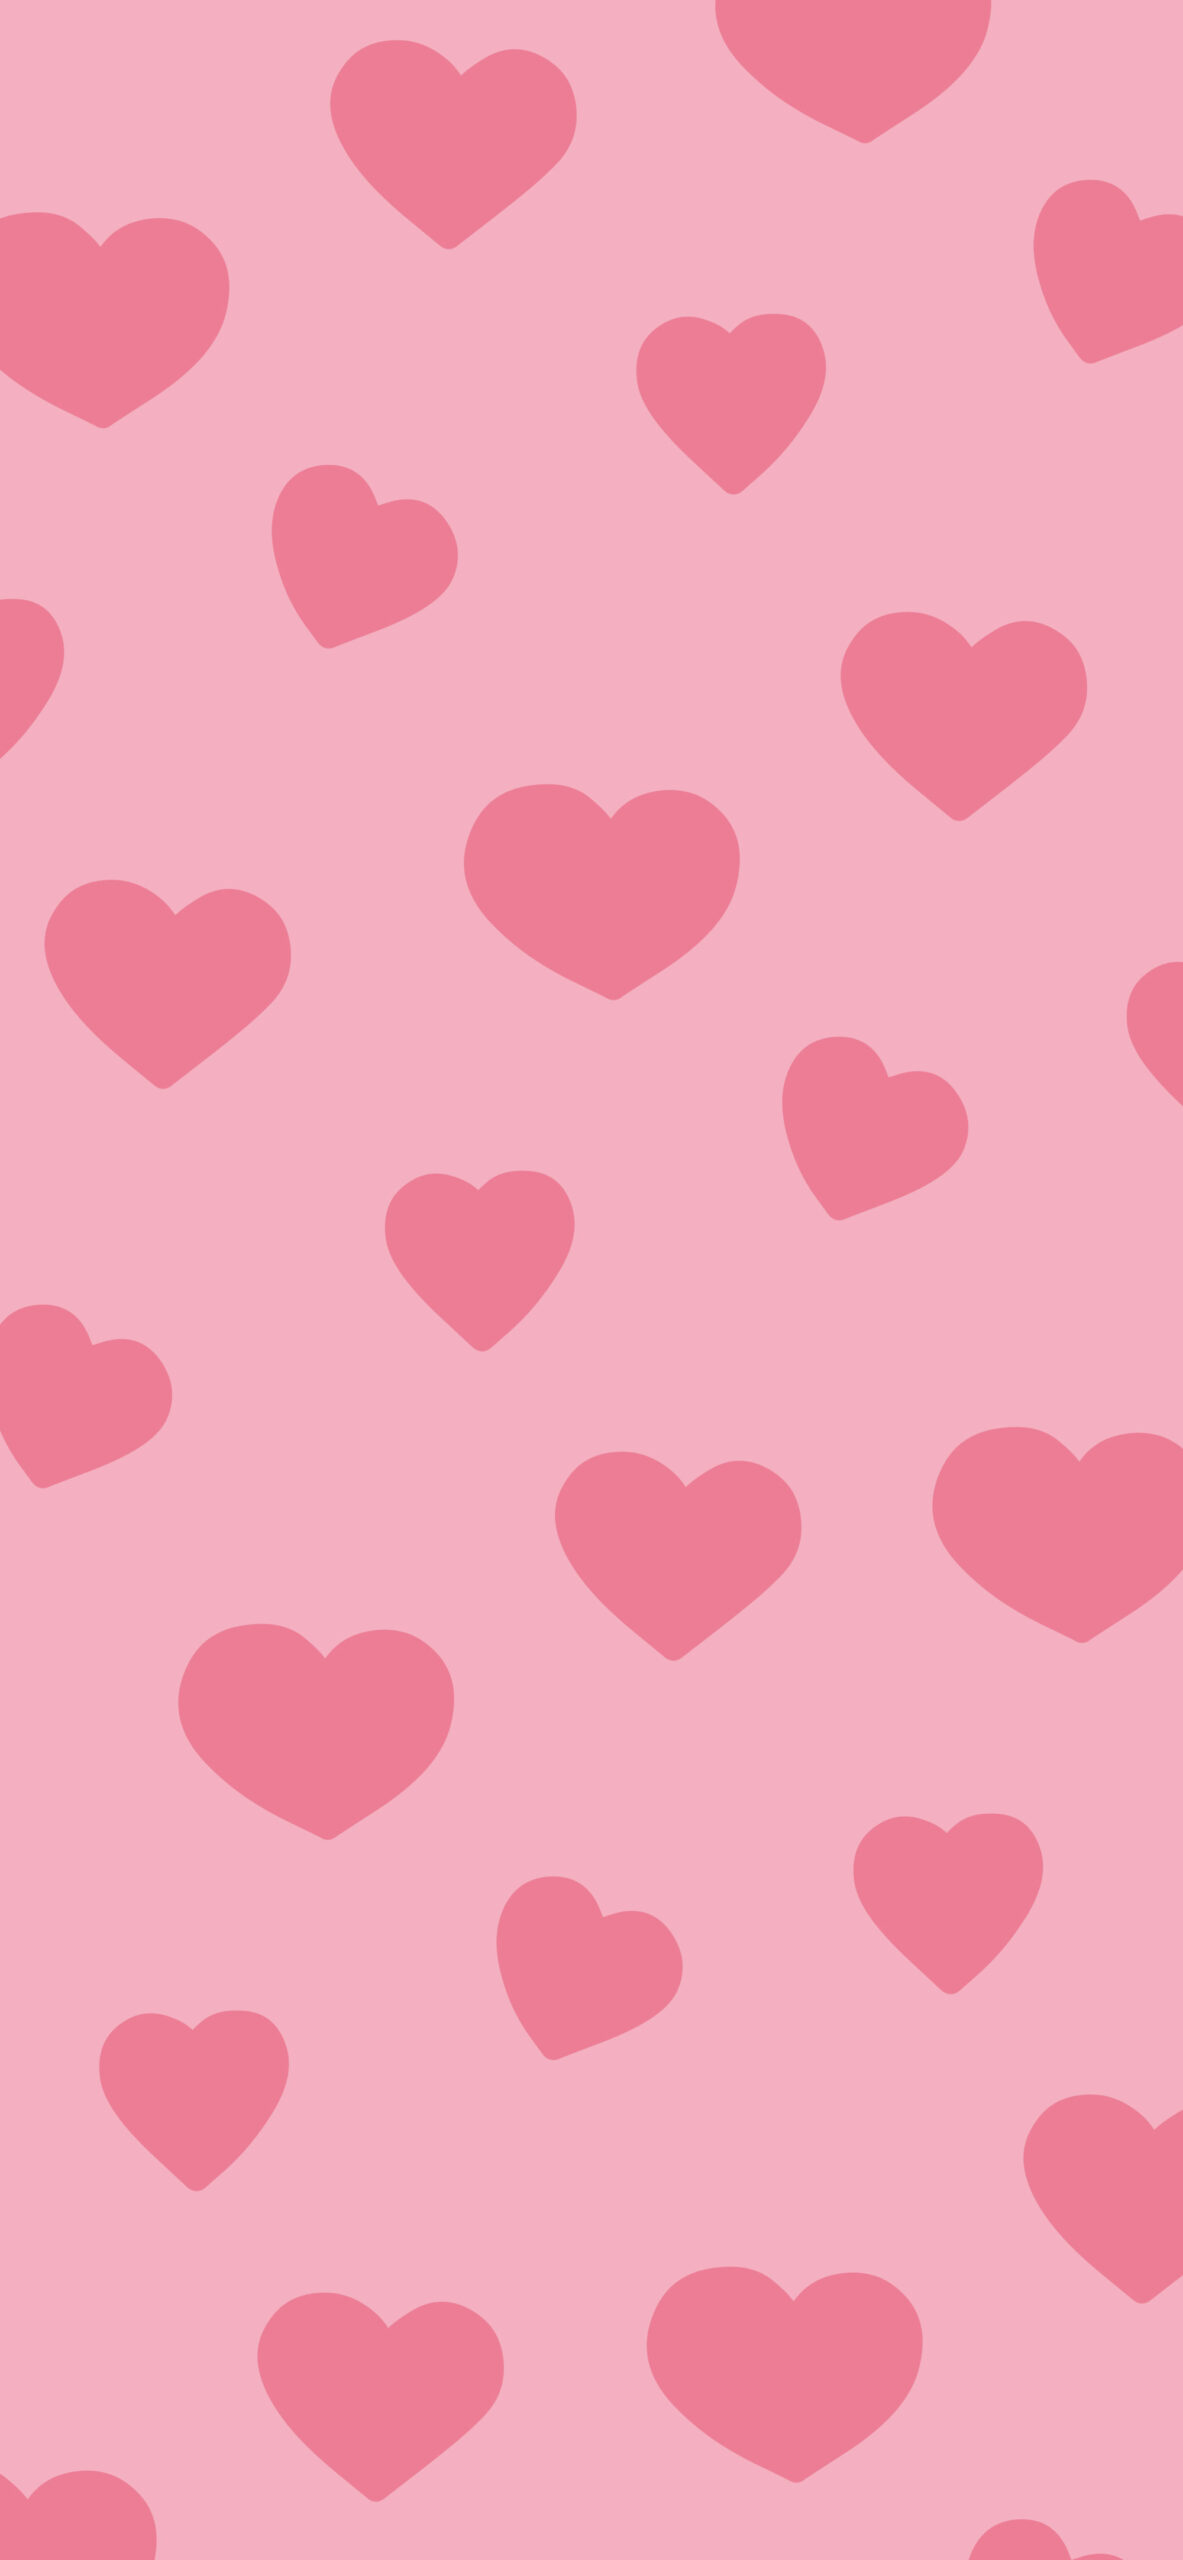 love hearts pattern pink background